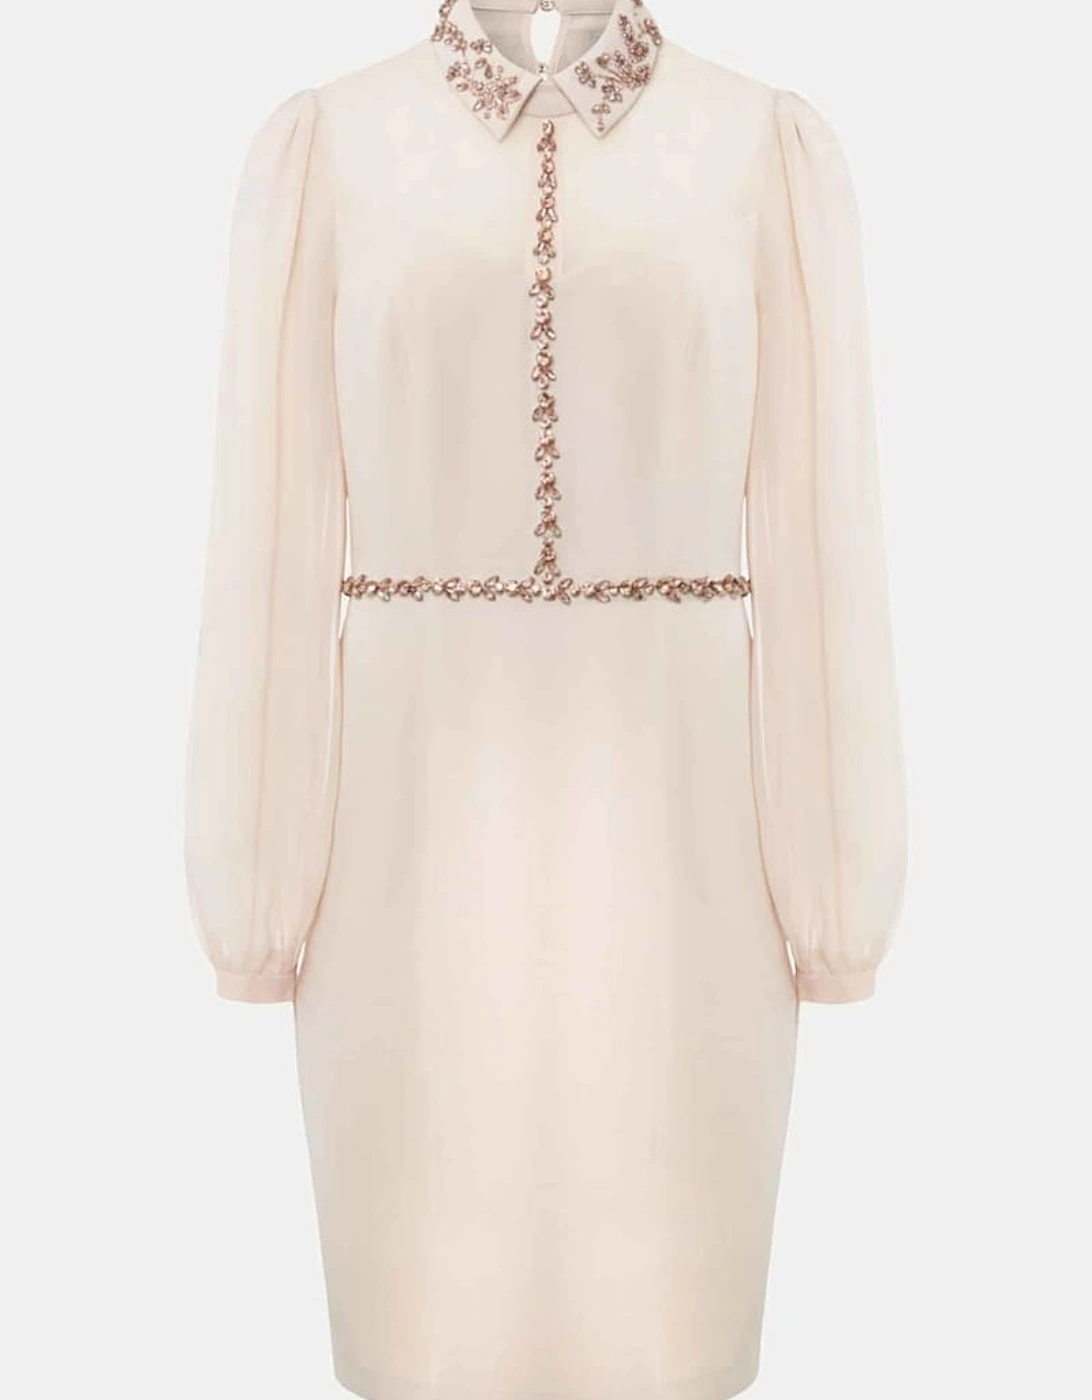 Avah Embellished Fitted Dress